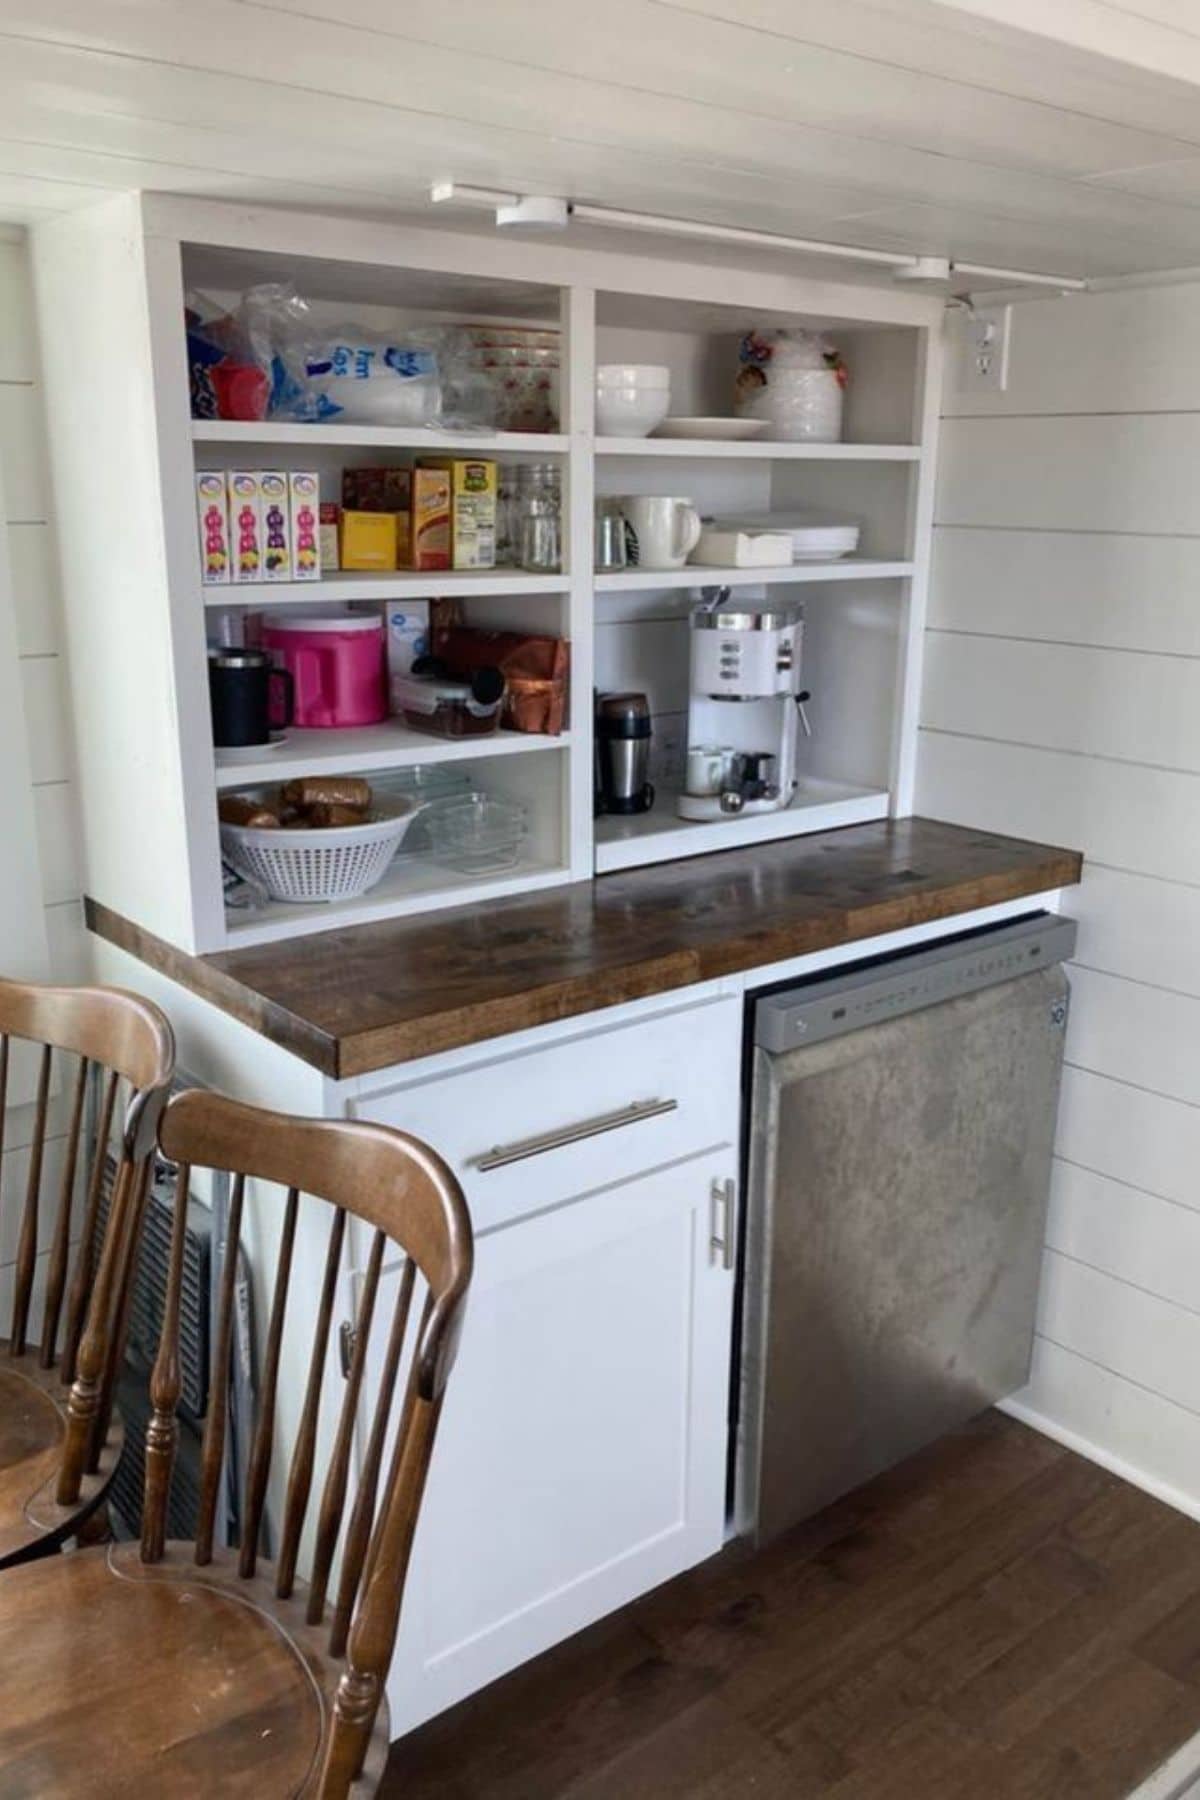 Stainless steel dishwasher under cabinet with open shelves above